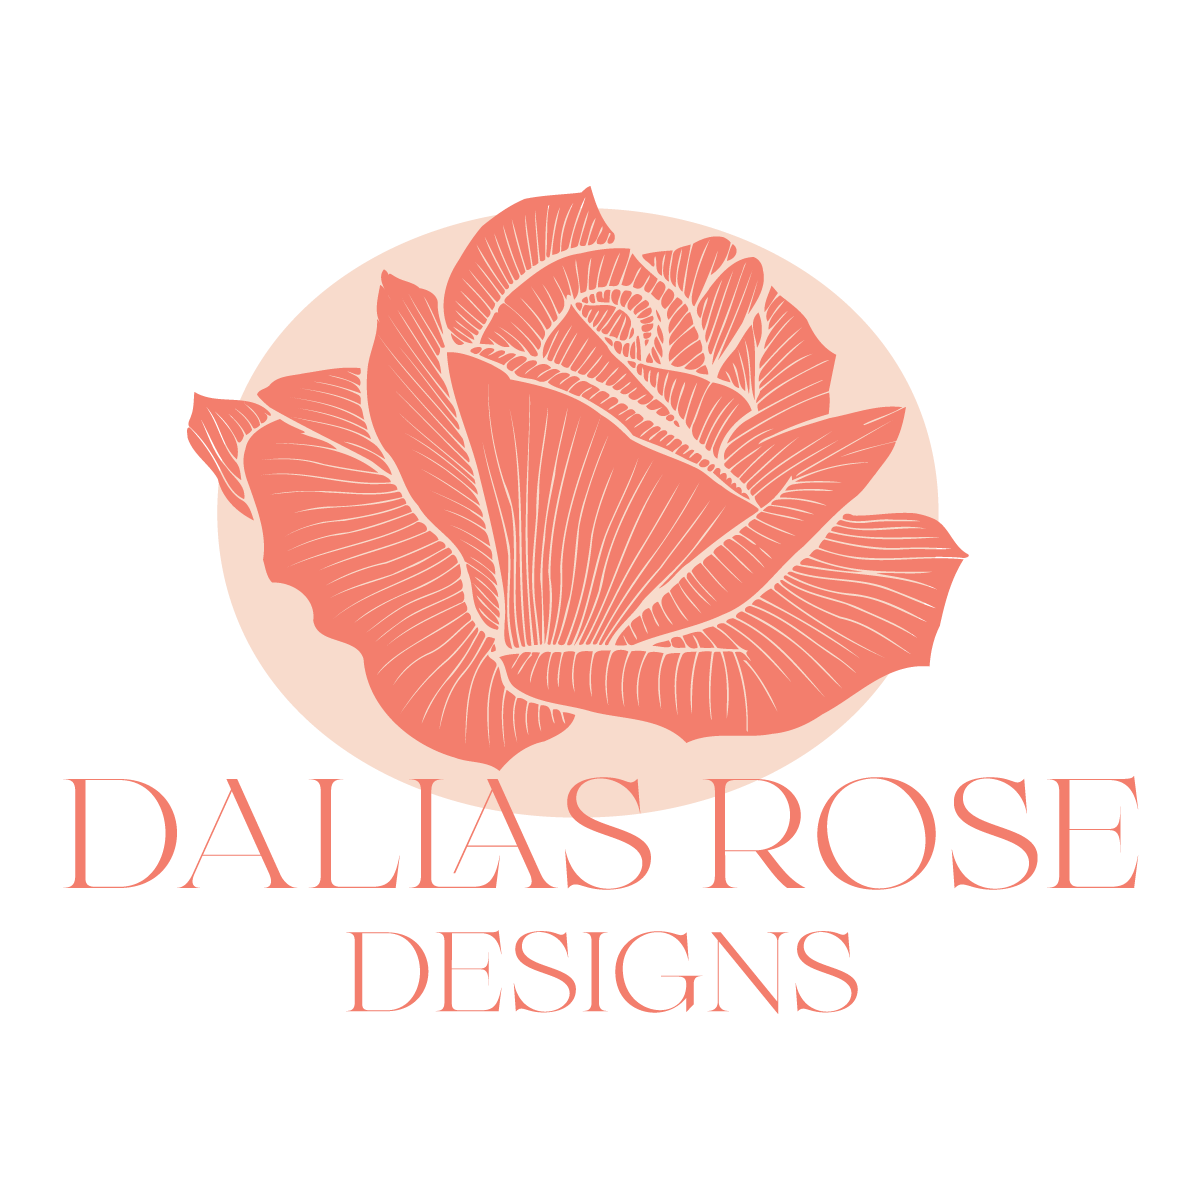 A logo for dallas rose designs with a pink rose in a circle